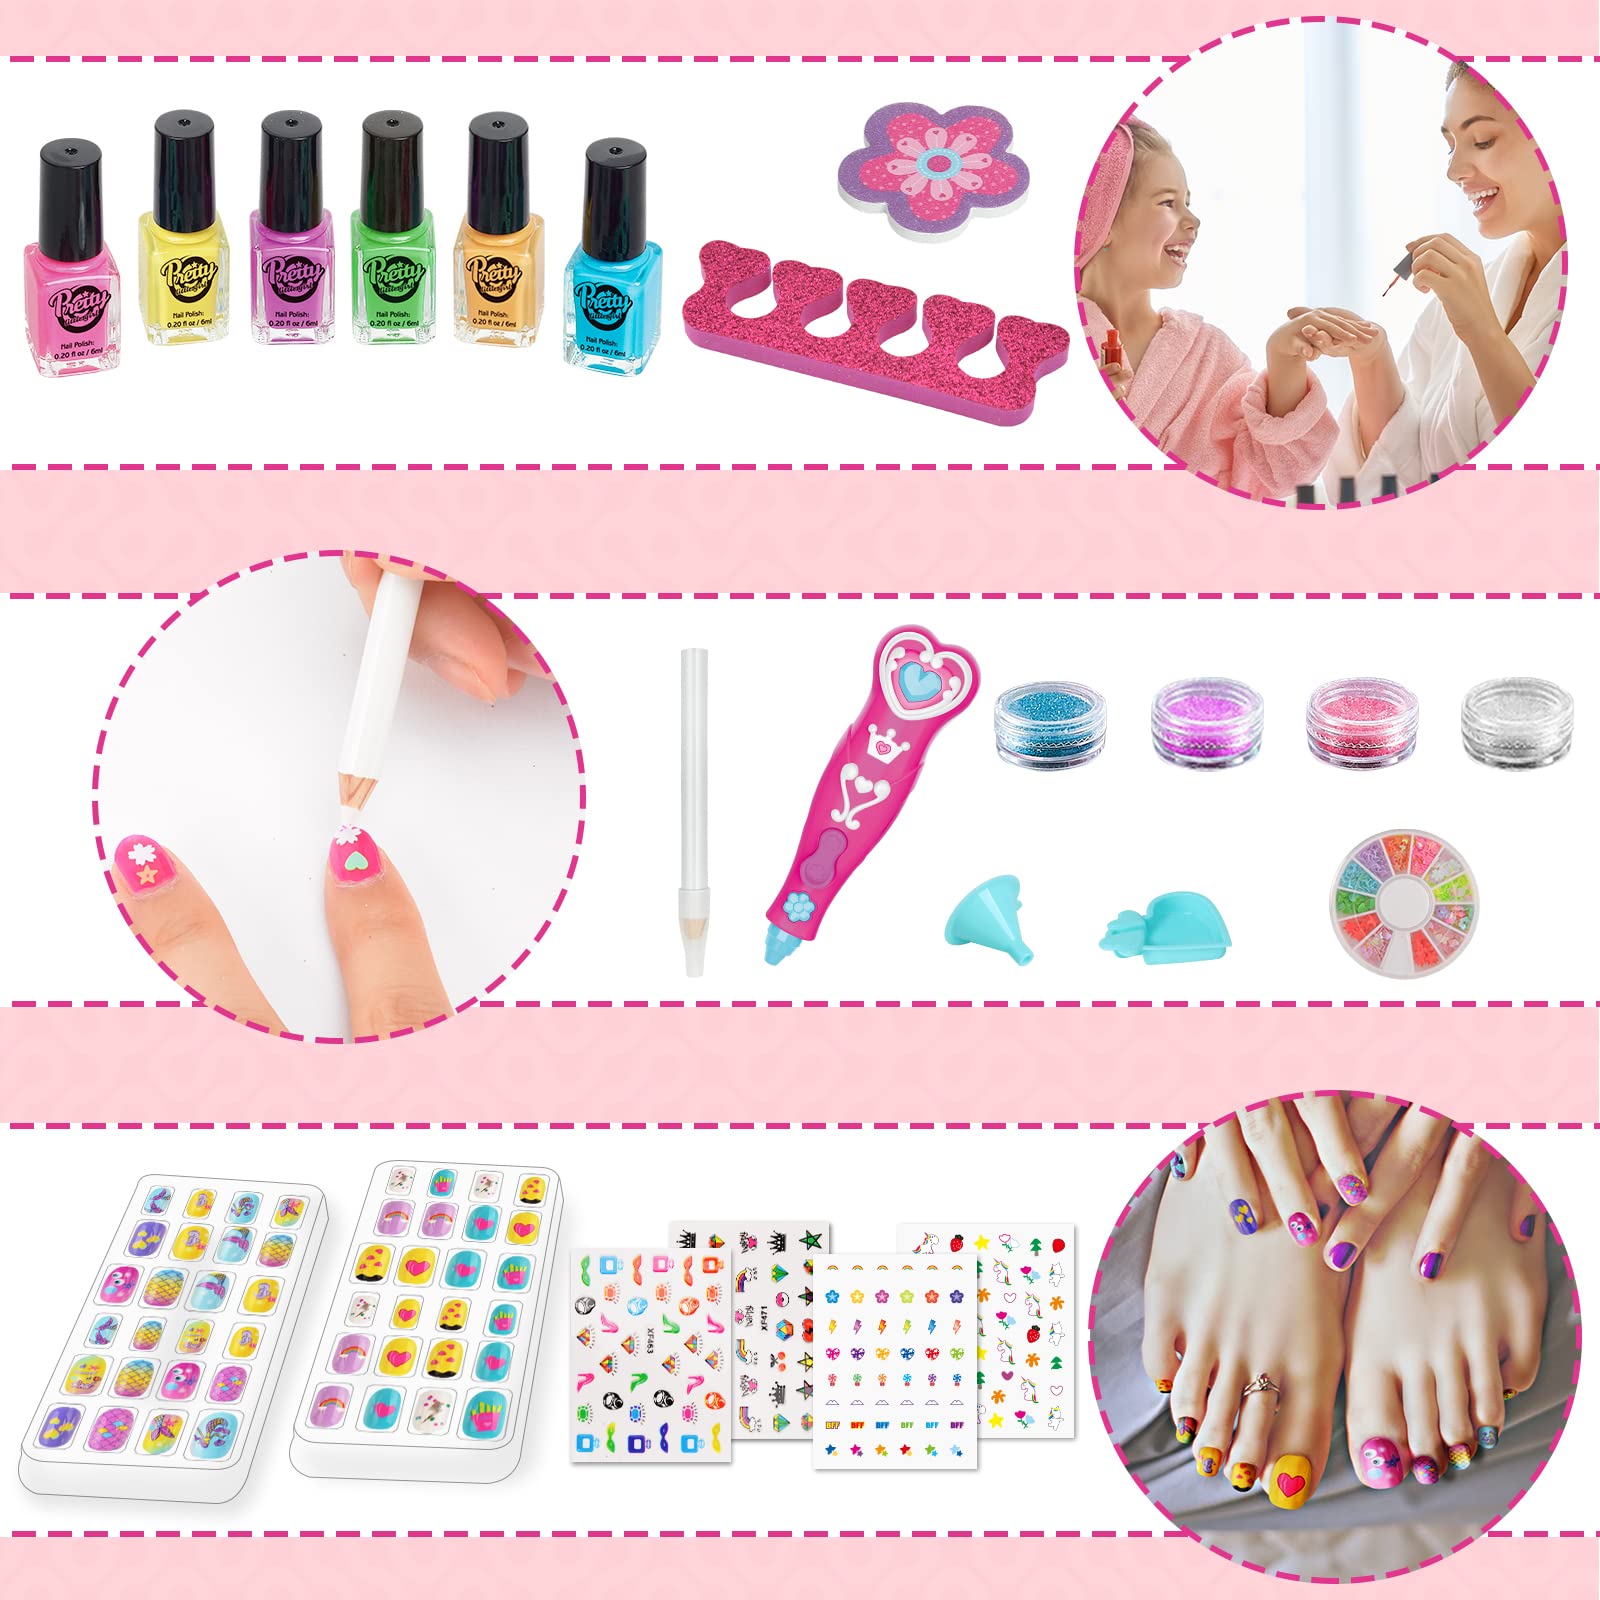 Quick Nail Art kit for Girls Birthday Gift for Girls Little Girls, Kids,  Role Play kitty Party (Multi Cute Nail Designs)- Multicolor - Nail Art kit  for Girls Birthday Gift for Girls